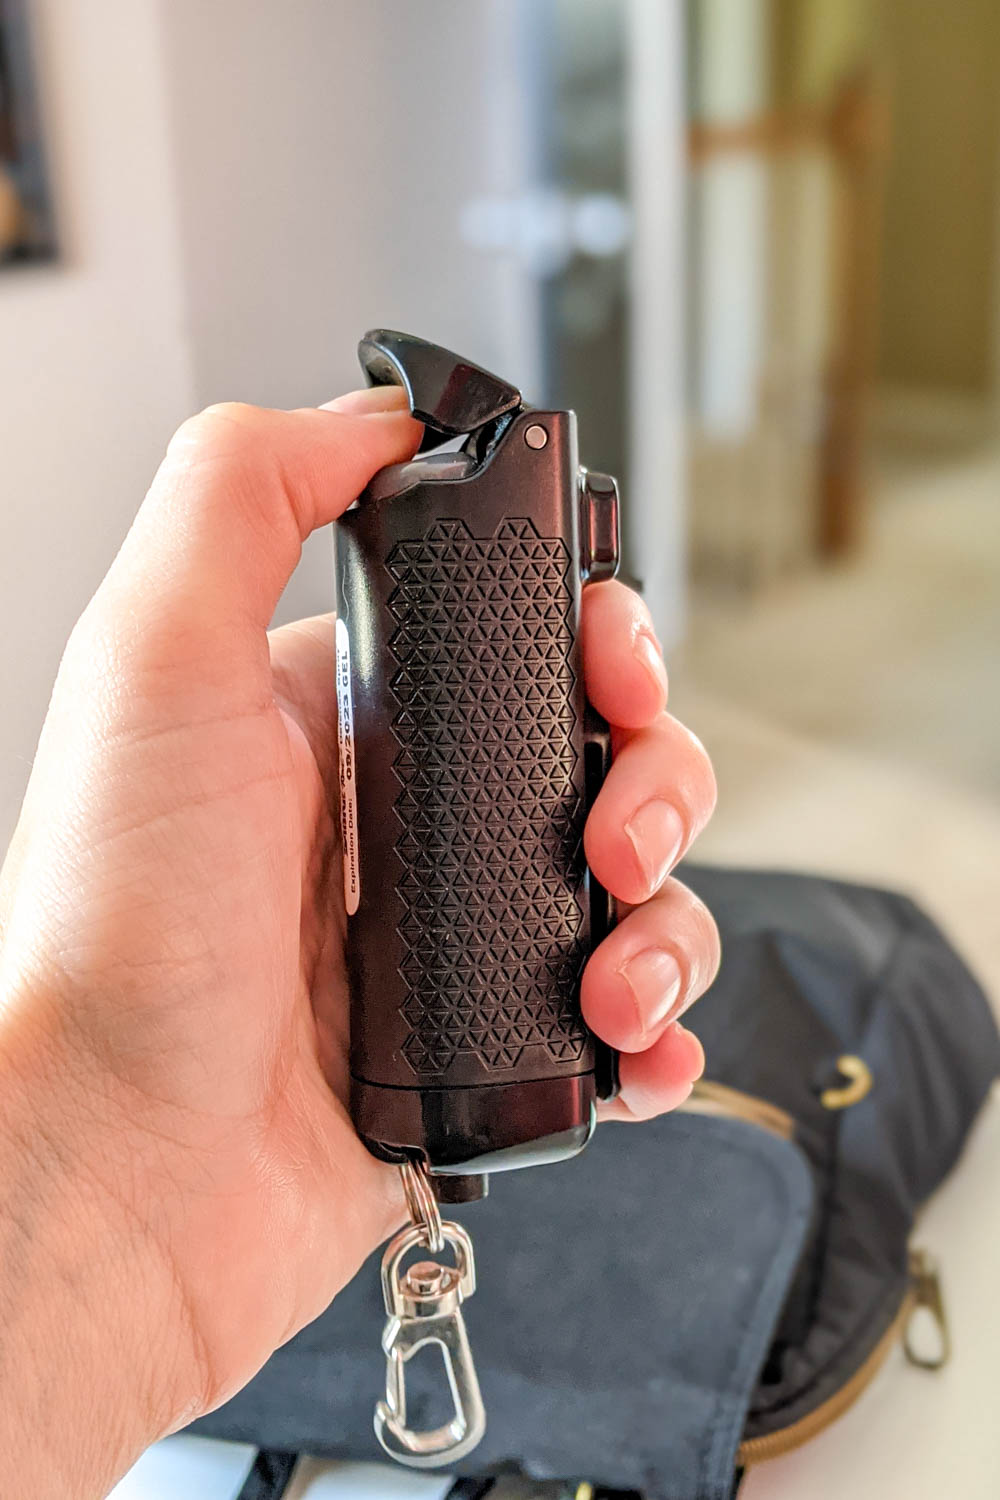 pepper spray | Must-Have Travel Safety Items: 17 Essentials for Your Travel Safety Kit | Travel health and safety | solo female travel safety